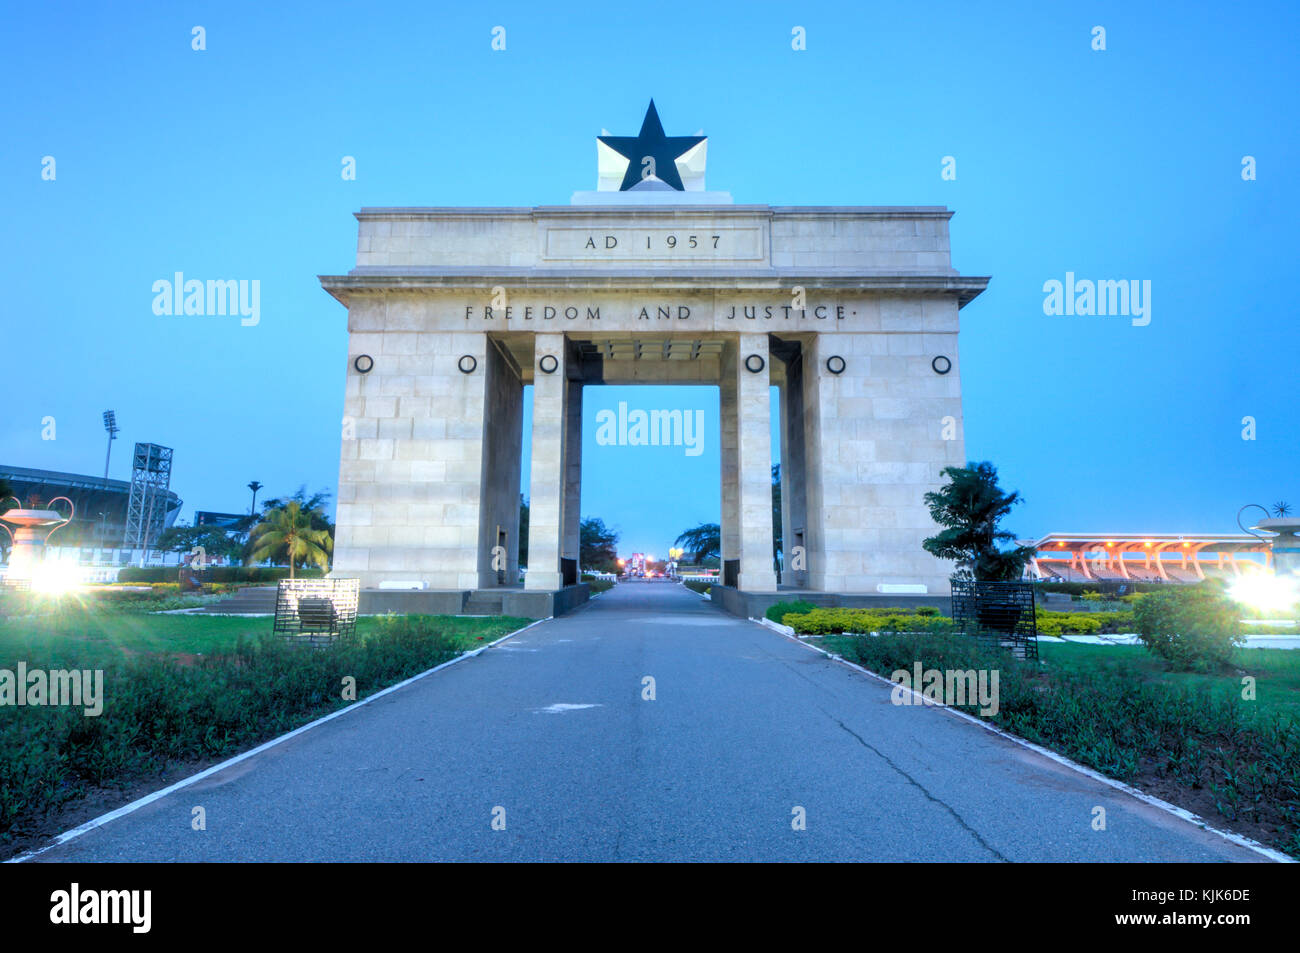 The Independence Arch of Independence Square of Accra, Ghana at sunset. Inscribed with the words 'Freedom and Justice, AD 1957', commemorates the inde Stock Photo